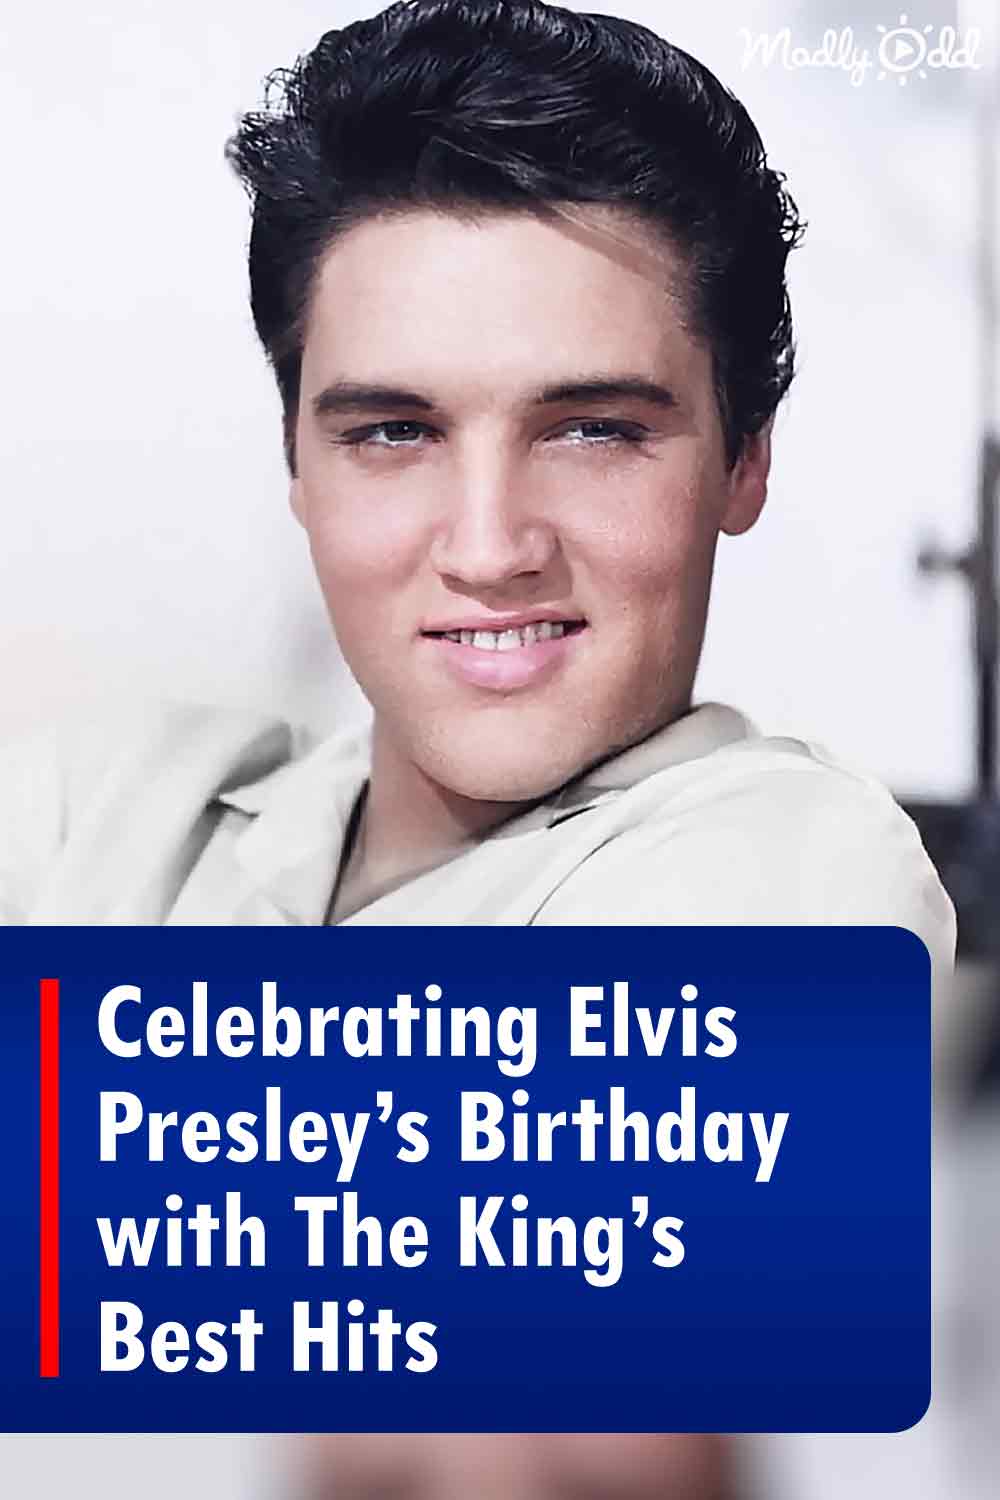 Celebrating Elvis Presley’s Birthday with The King’s Best Hits